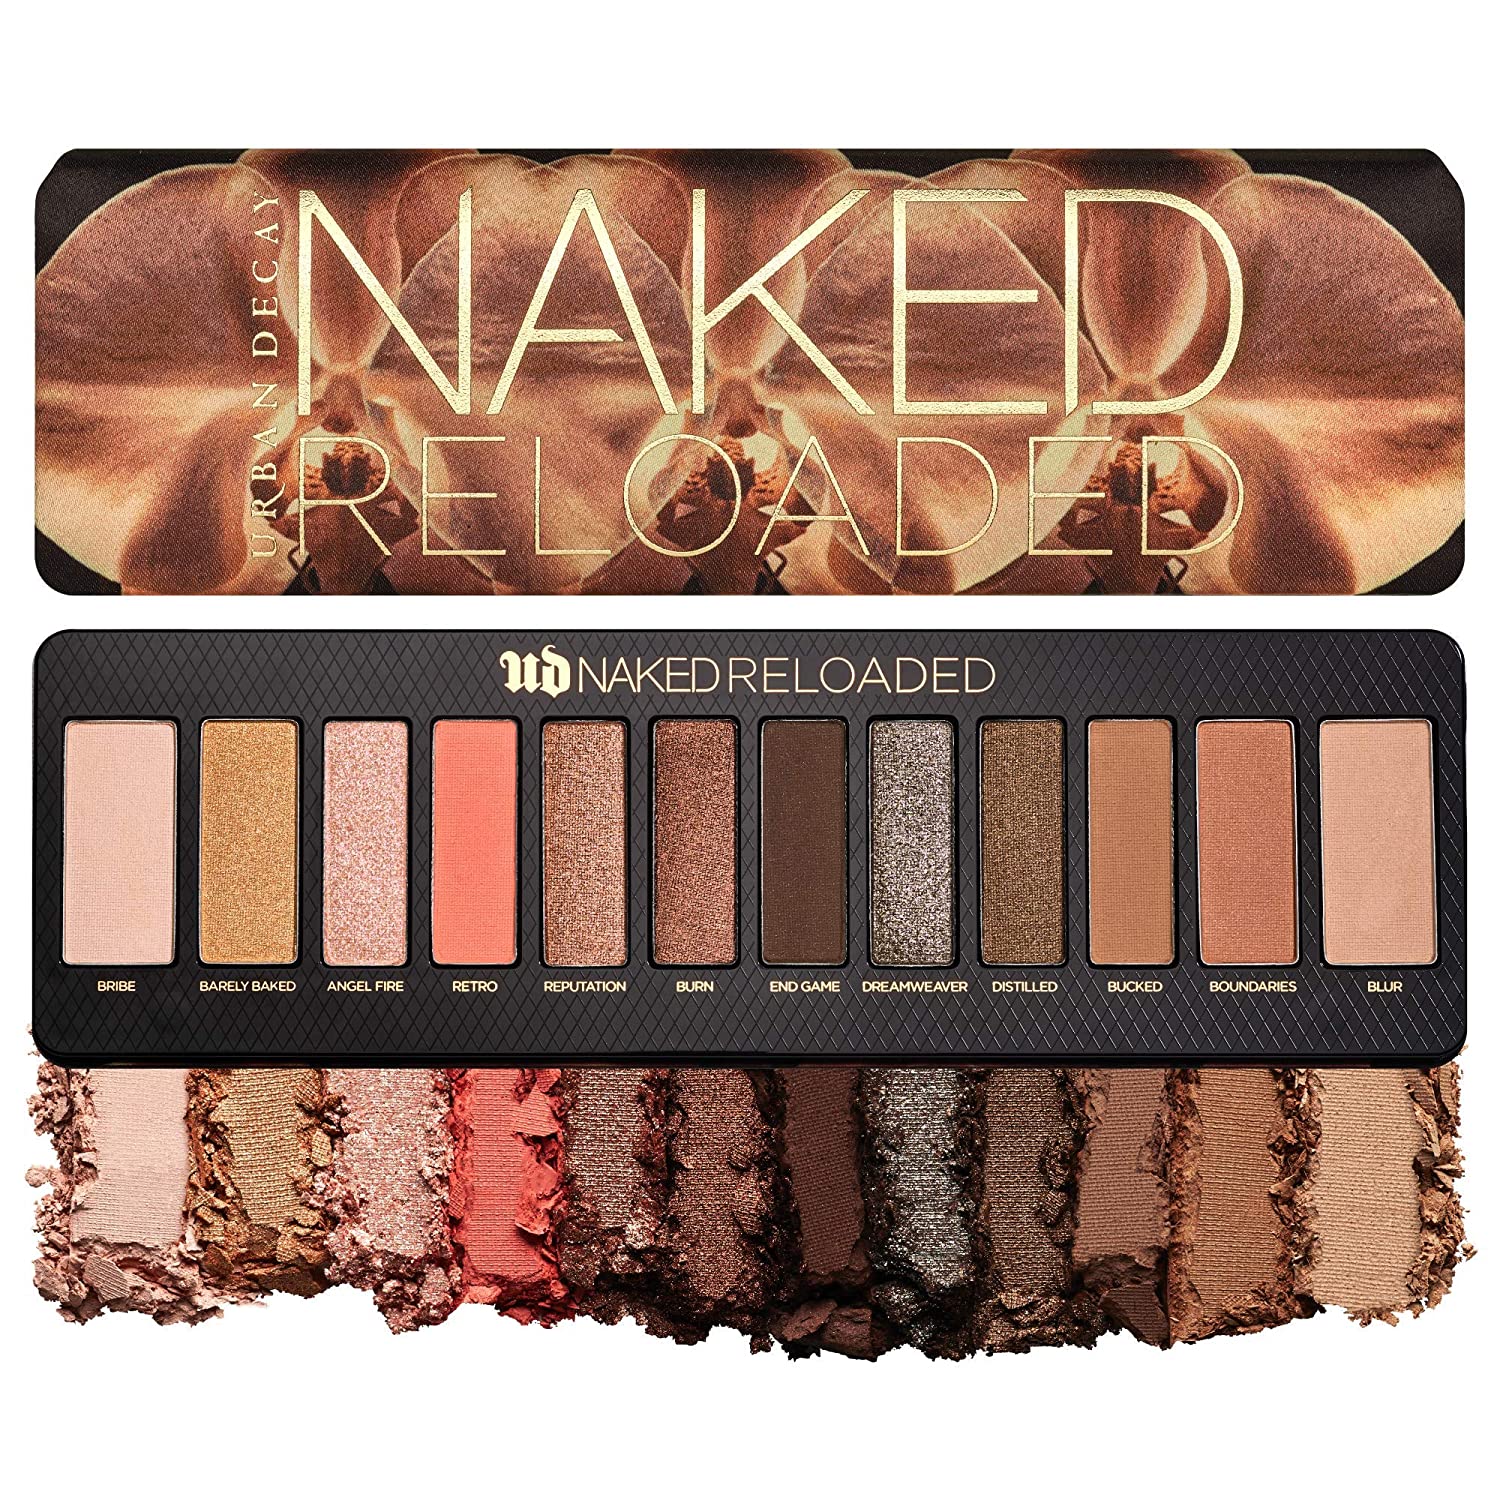 ''Urban Decay Naked Reloaded EYESHADOW Palette, 12 Universally Flattering Neutral Shades''